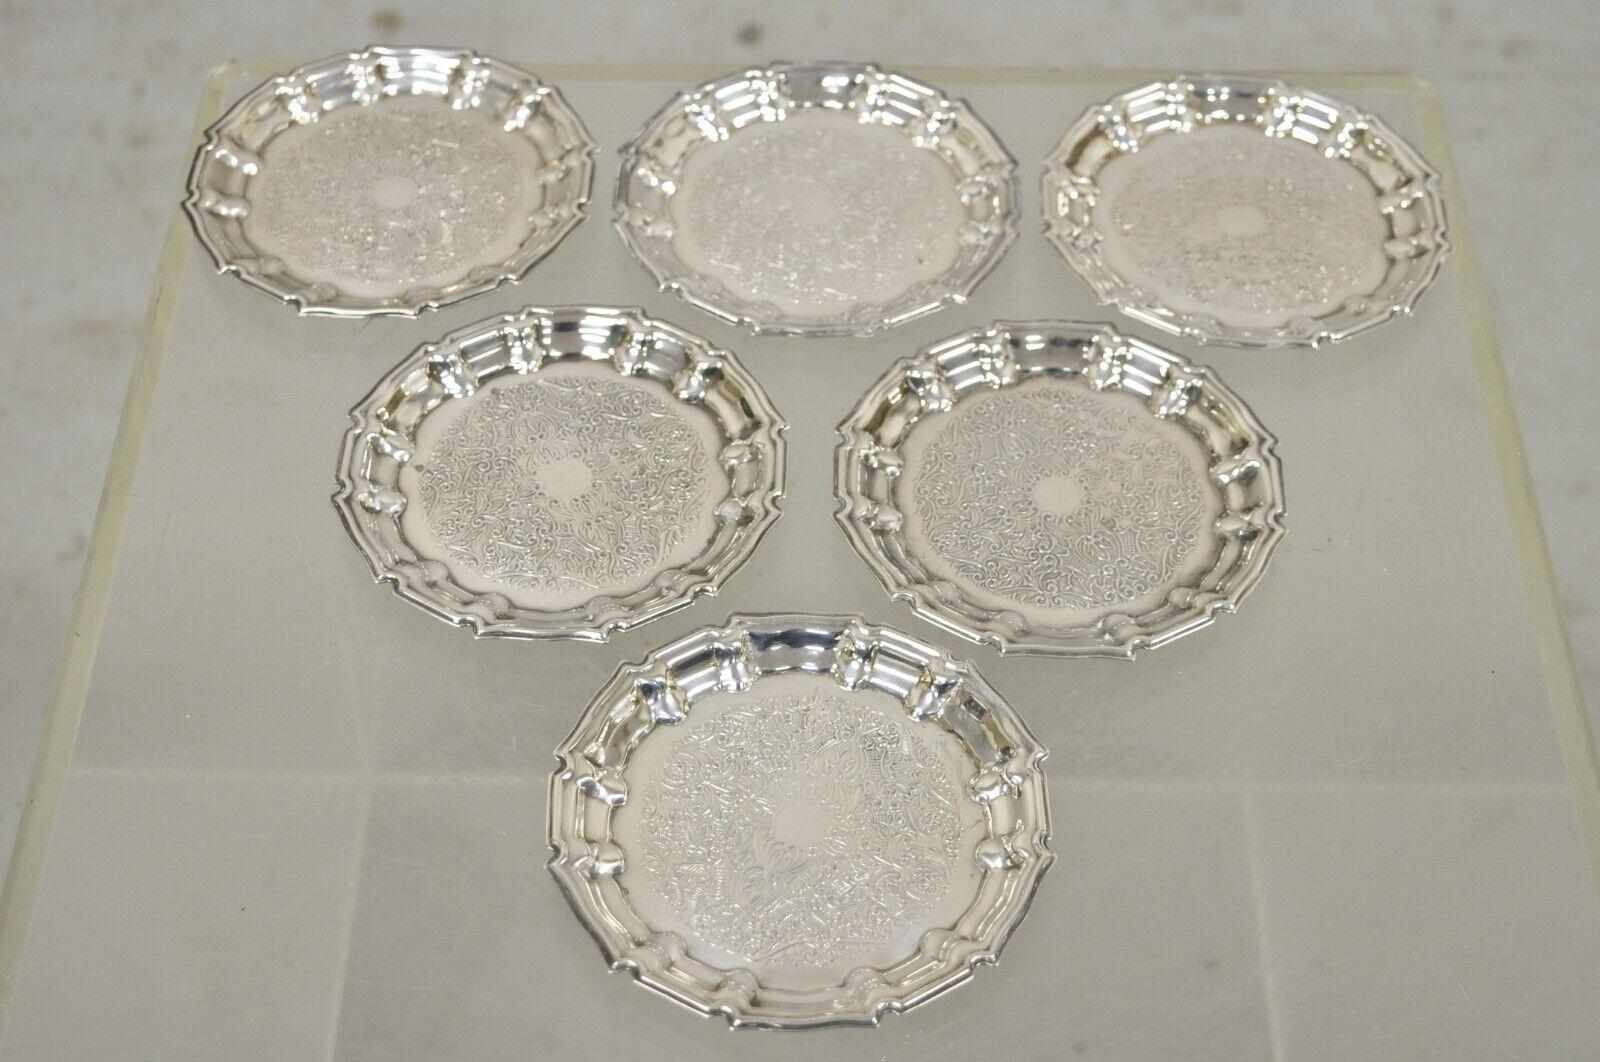 Frank Hawker England silverplate ornate wine coaster tray dish - set of 6 
Item features (6) dishes/coasters, ornate and fancy form. circa Early to Mid 20th Century. Measurements: 0.25